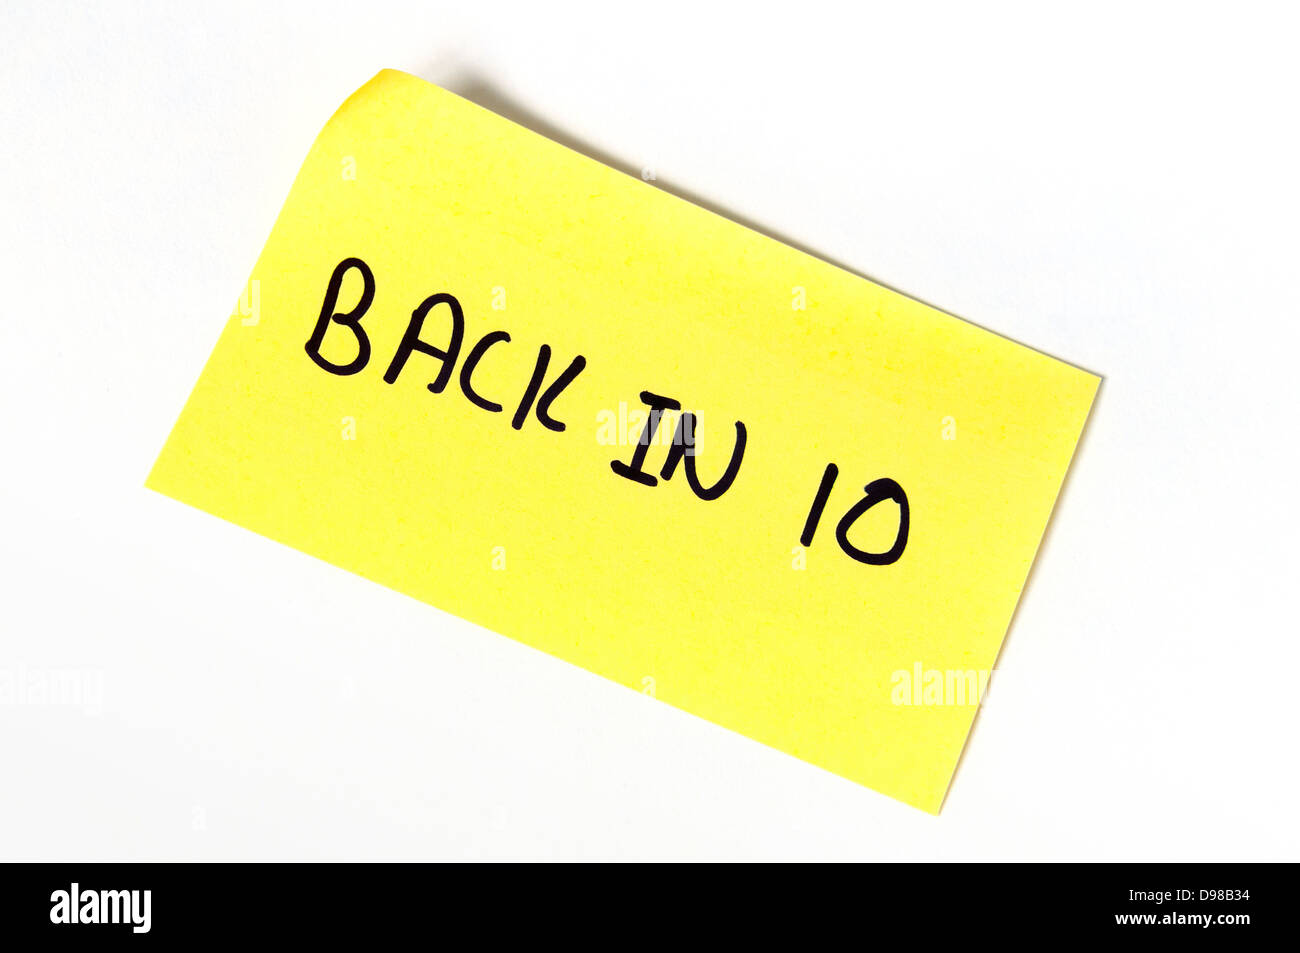 Back in 10 written on a yellow post-it note Stock Photo